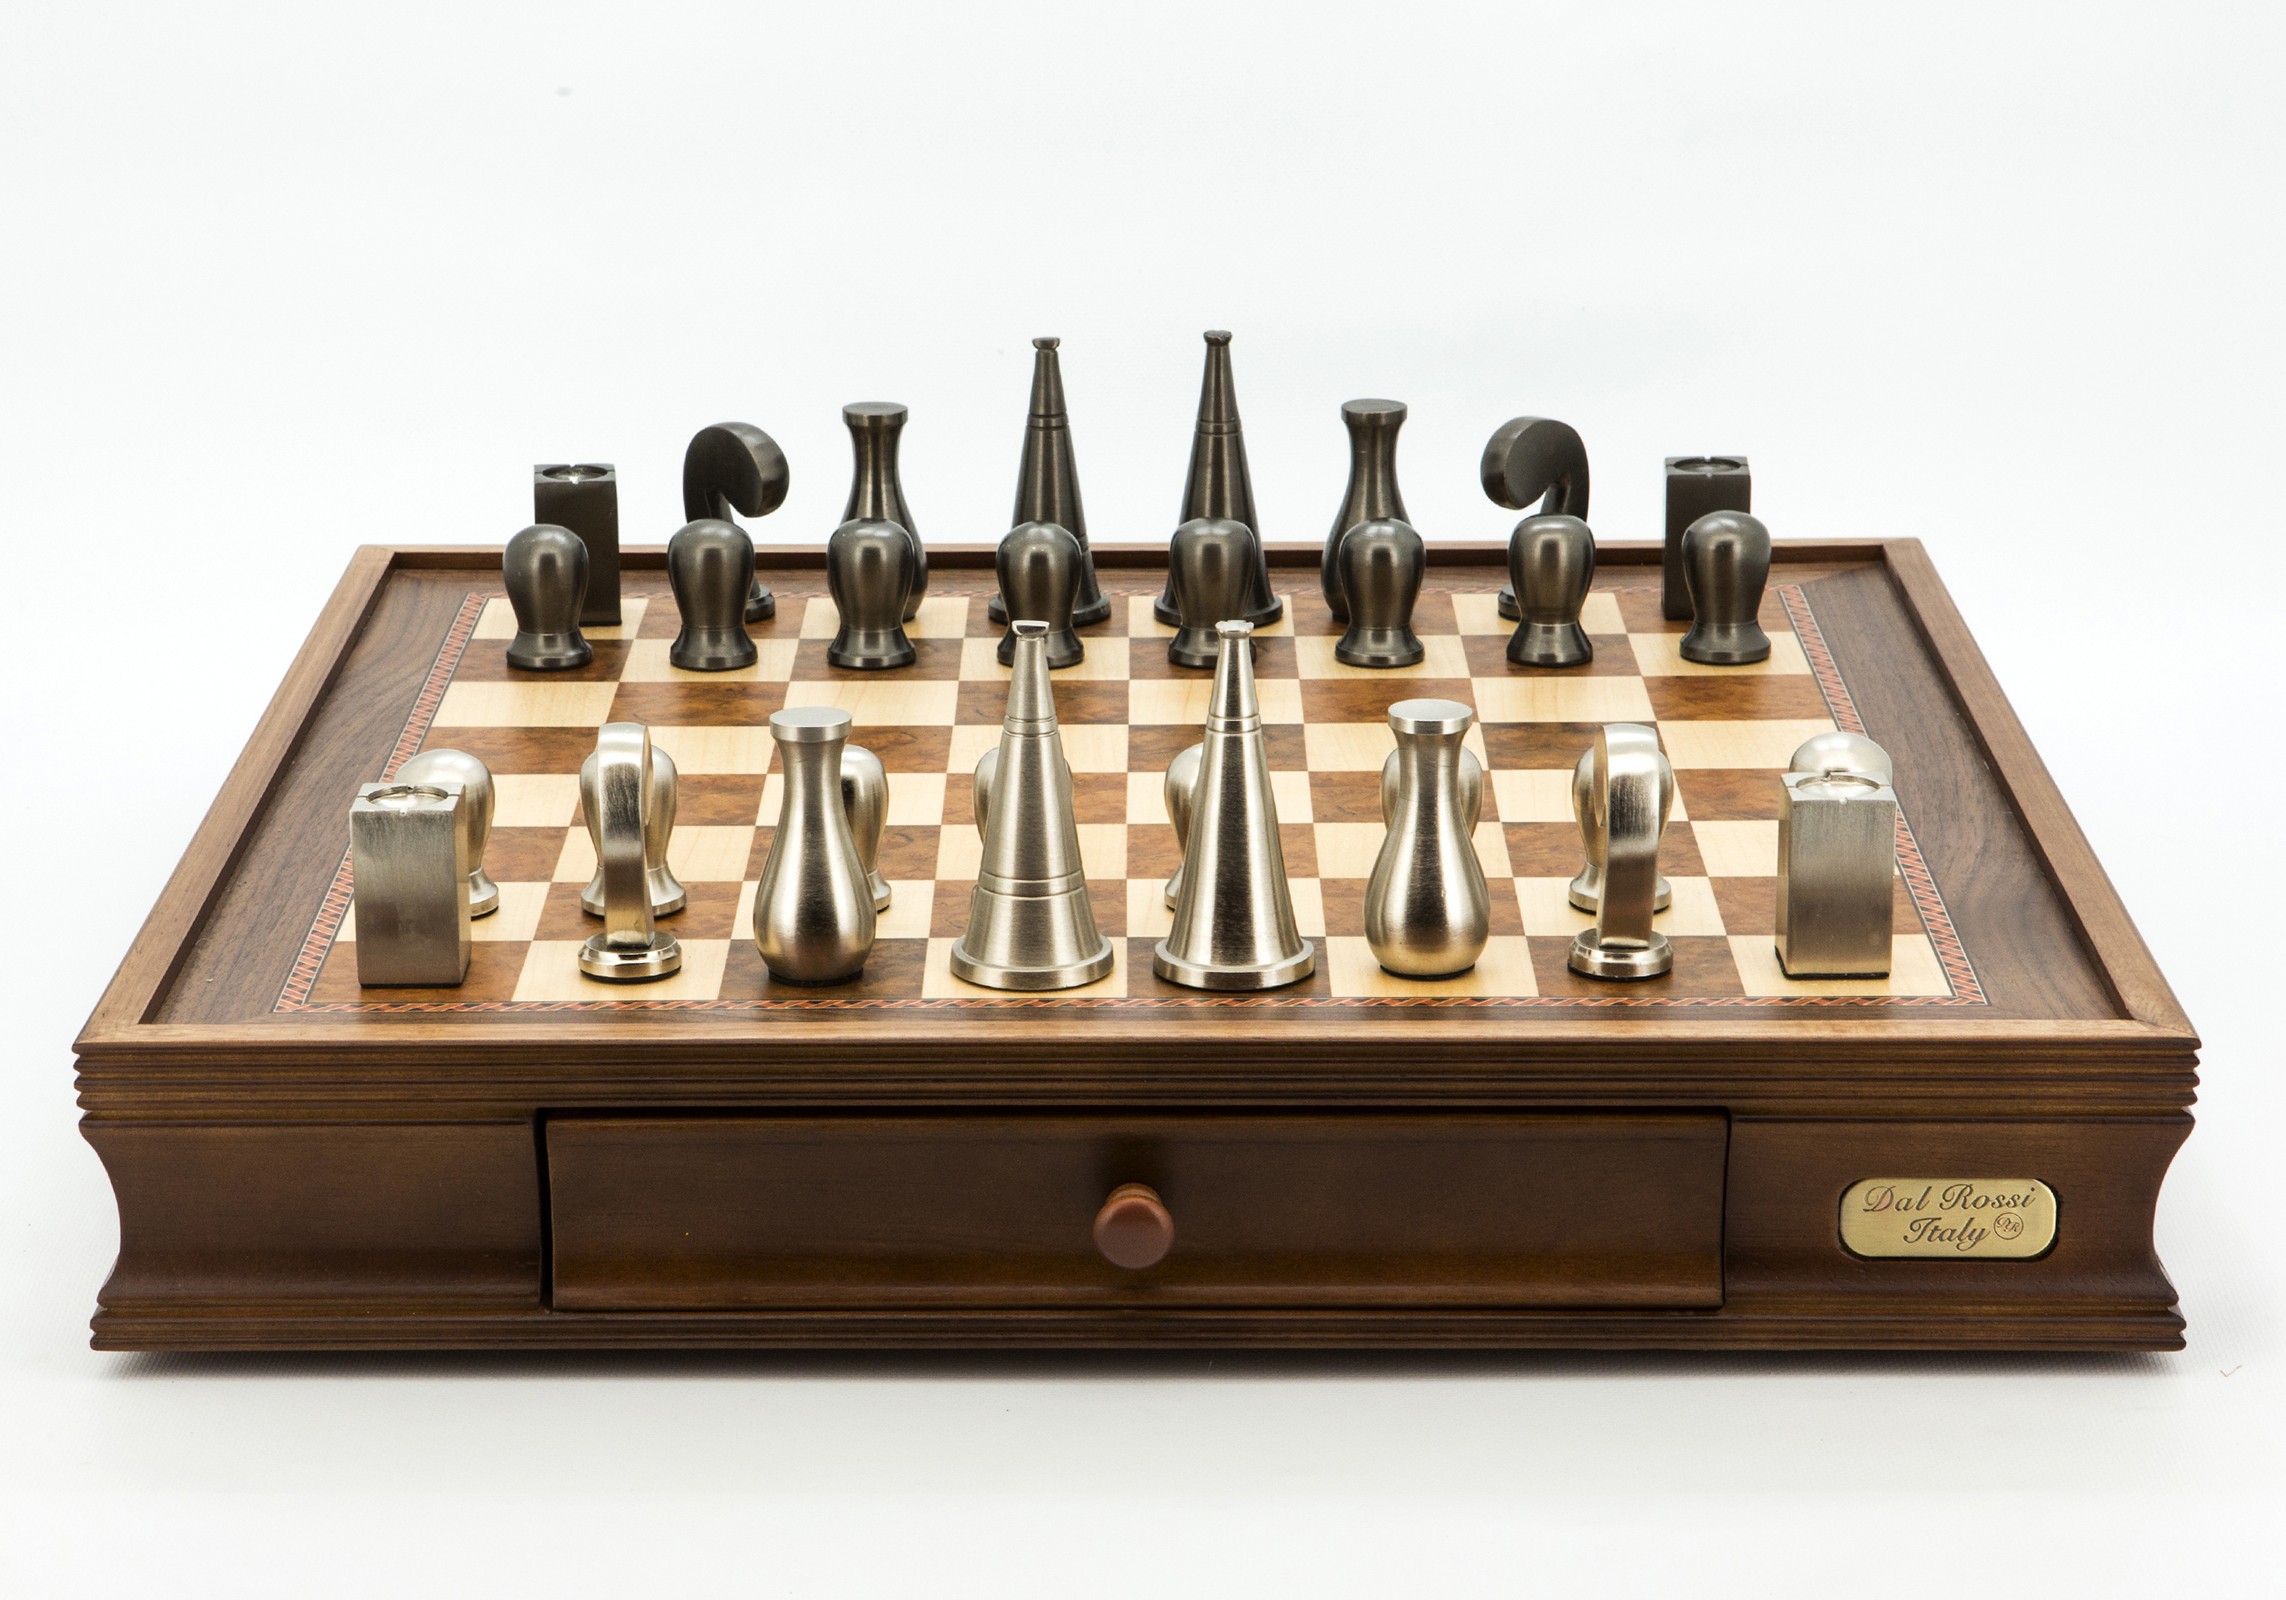 Dal Rossi Italy Chess Set Walnut Finish 16″ With Two Drawers, Metal Dark Titanium and Silver 90mm Chessmen